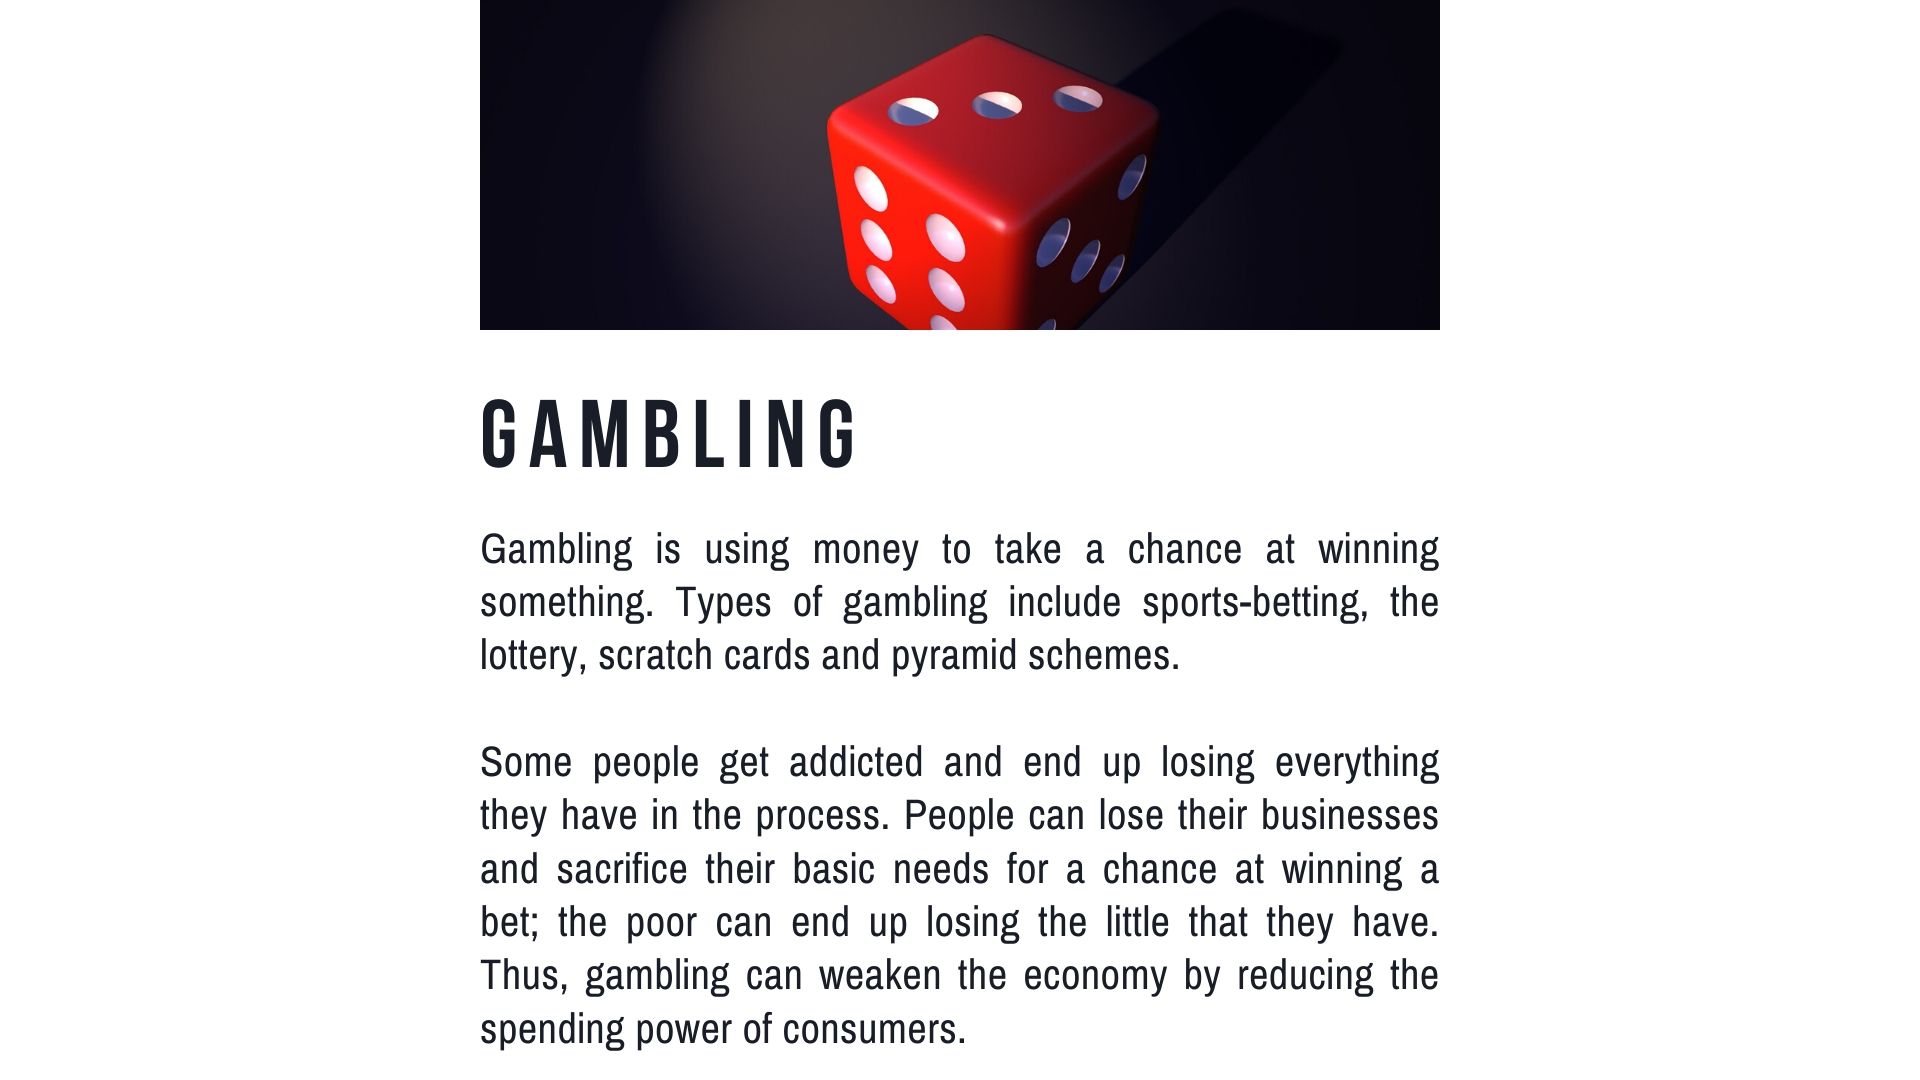 List of South African Contemporary Socio-Economic Issues - Definition and explanation of gambling